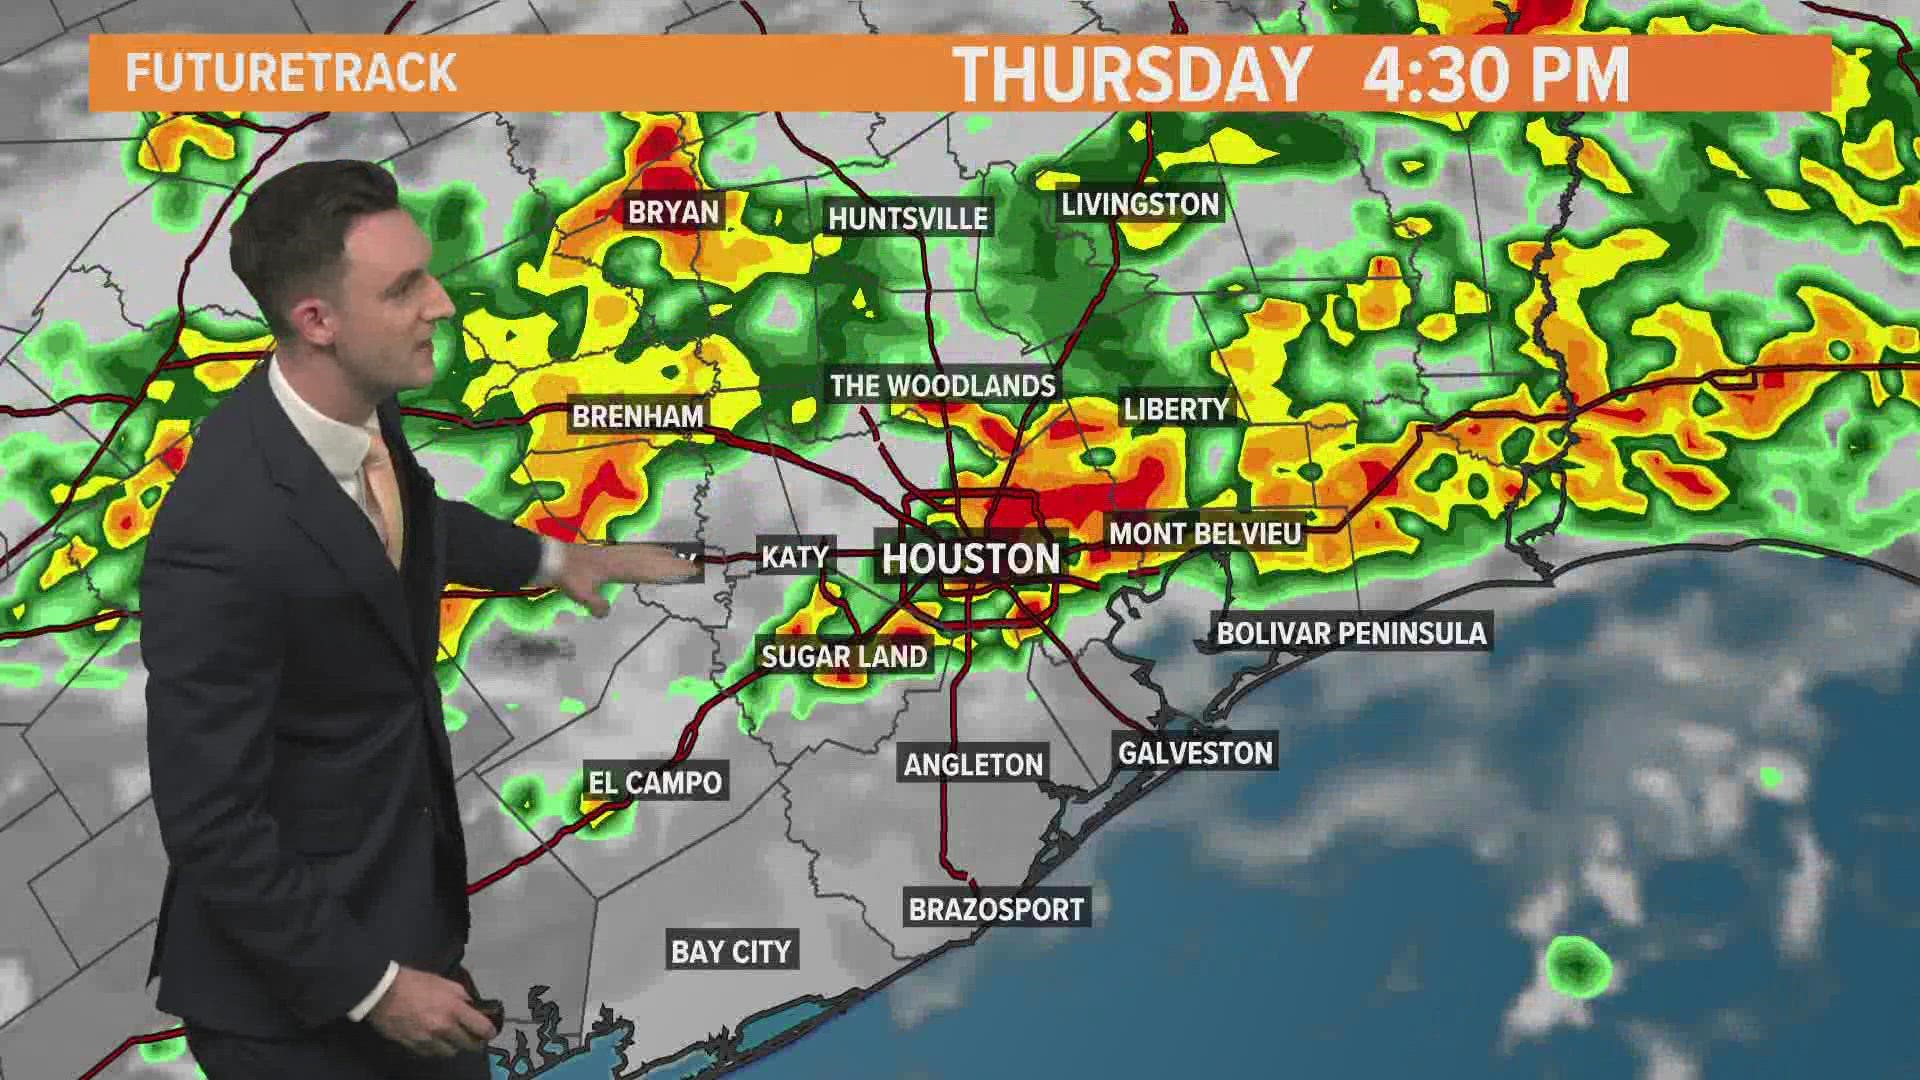 You're going to want to pay attention to the forecast as a front is expected to push a line of thunderstorms through the Houston area Thursday.